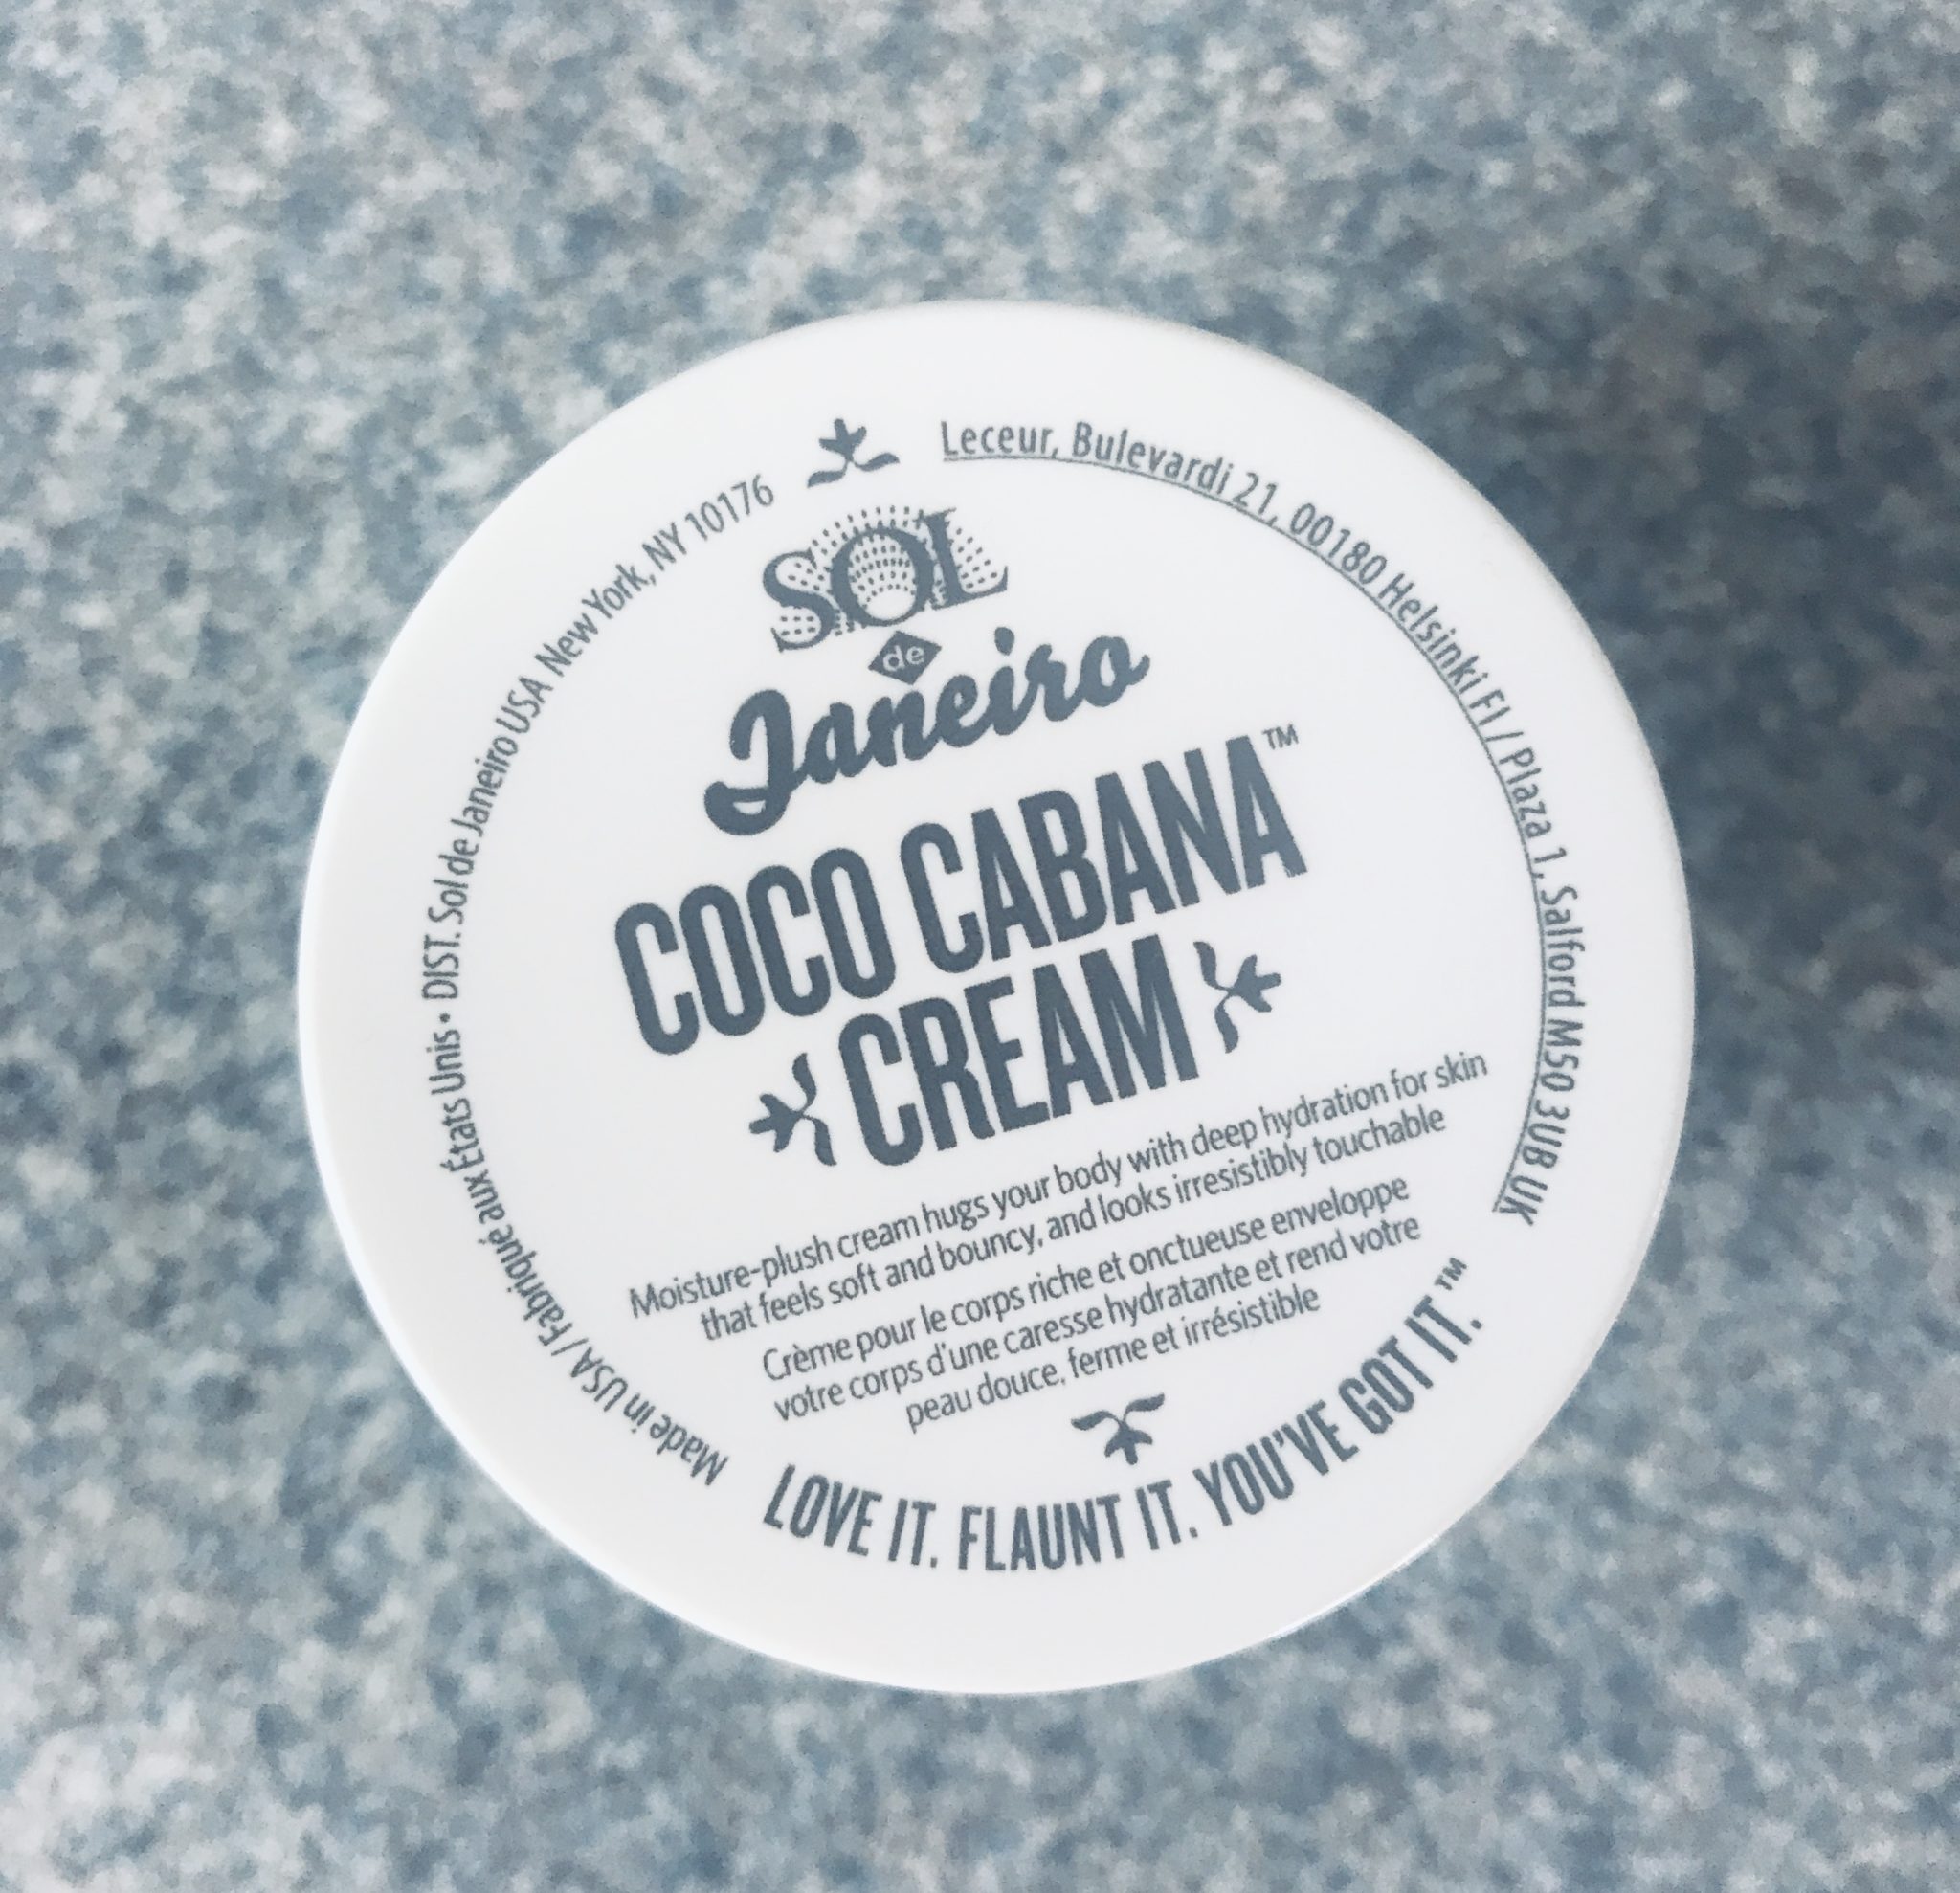 view of the top of the lid of the jar of Coco Cabana Cream